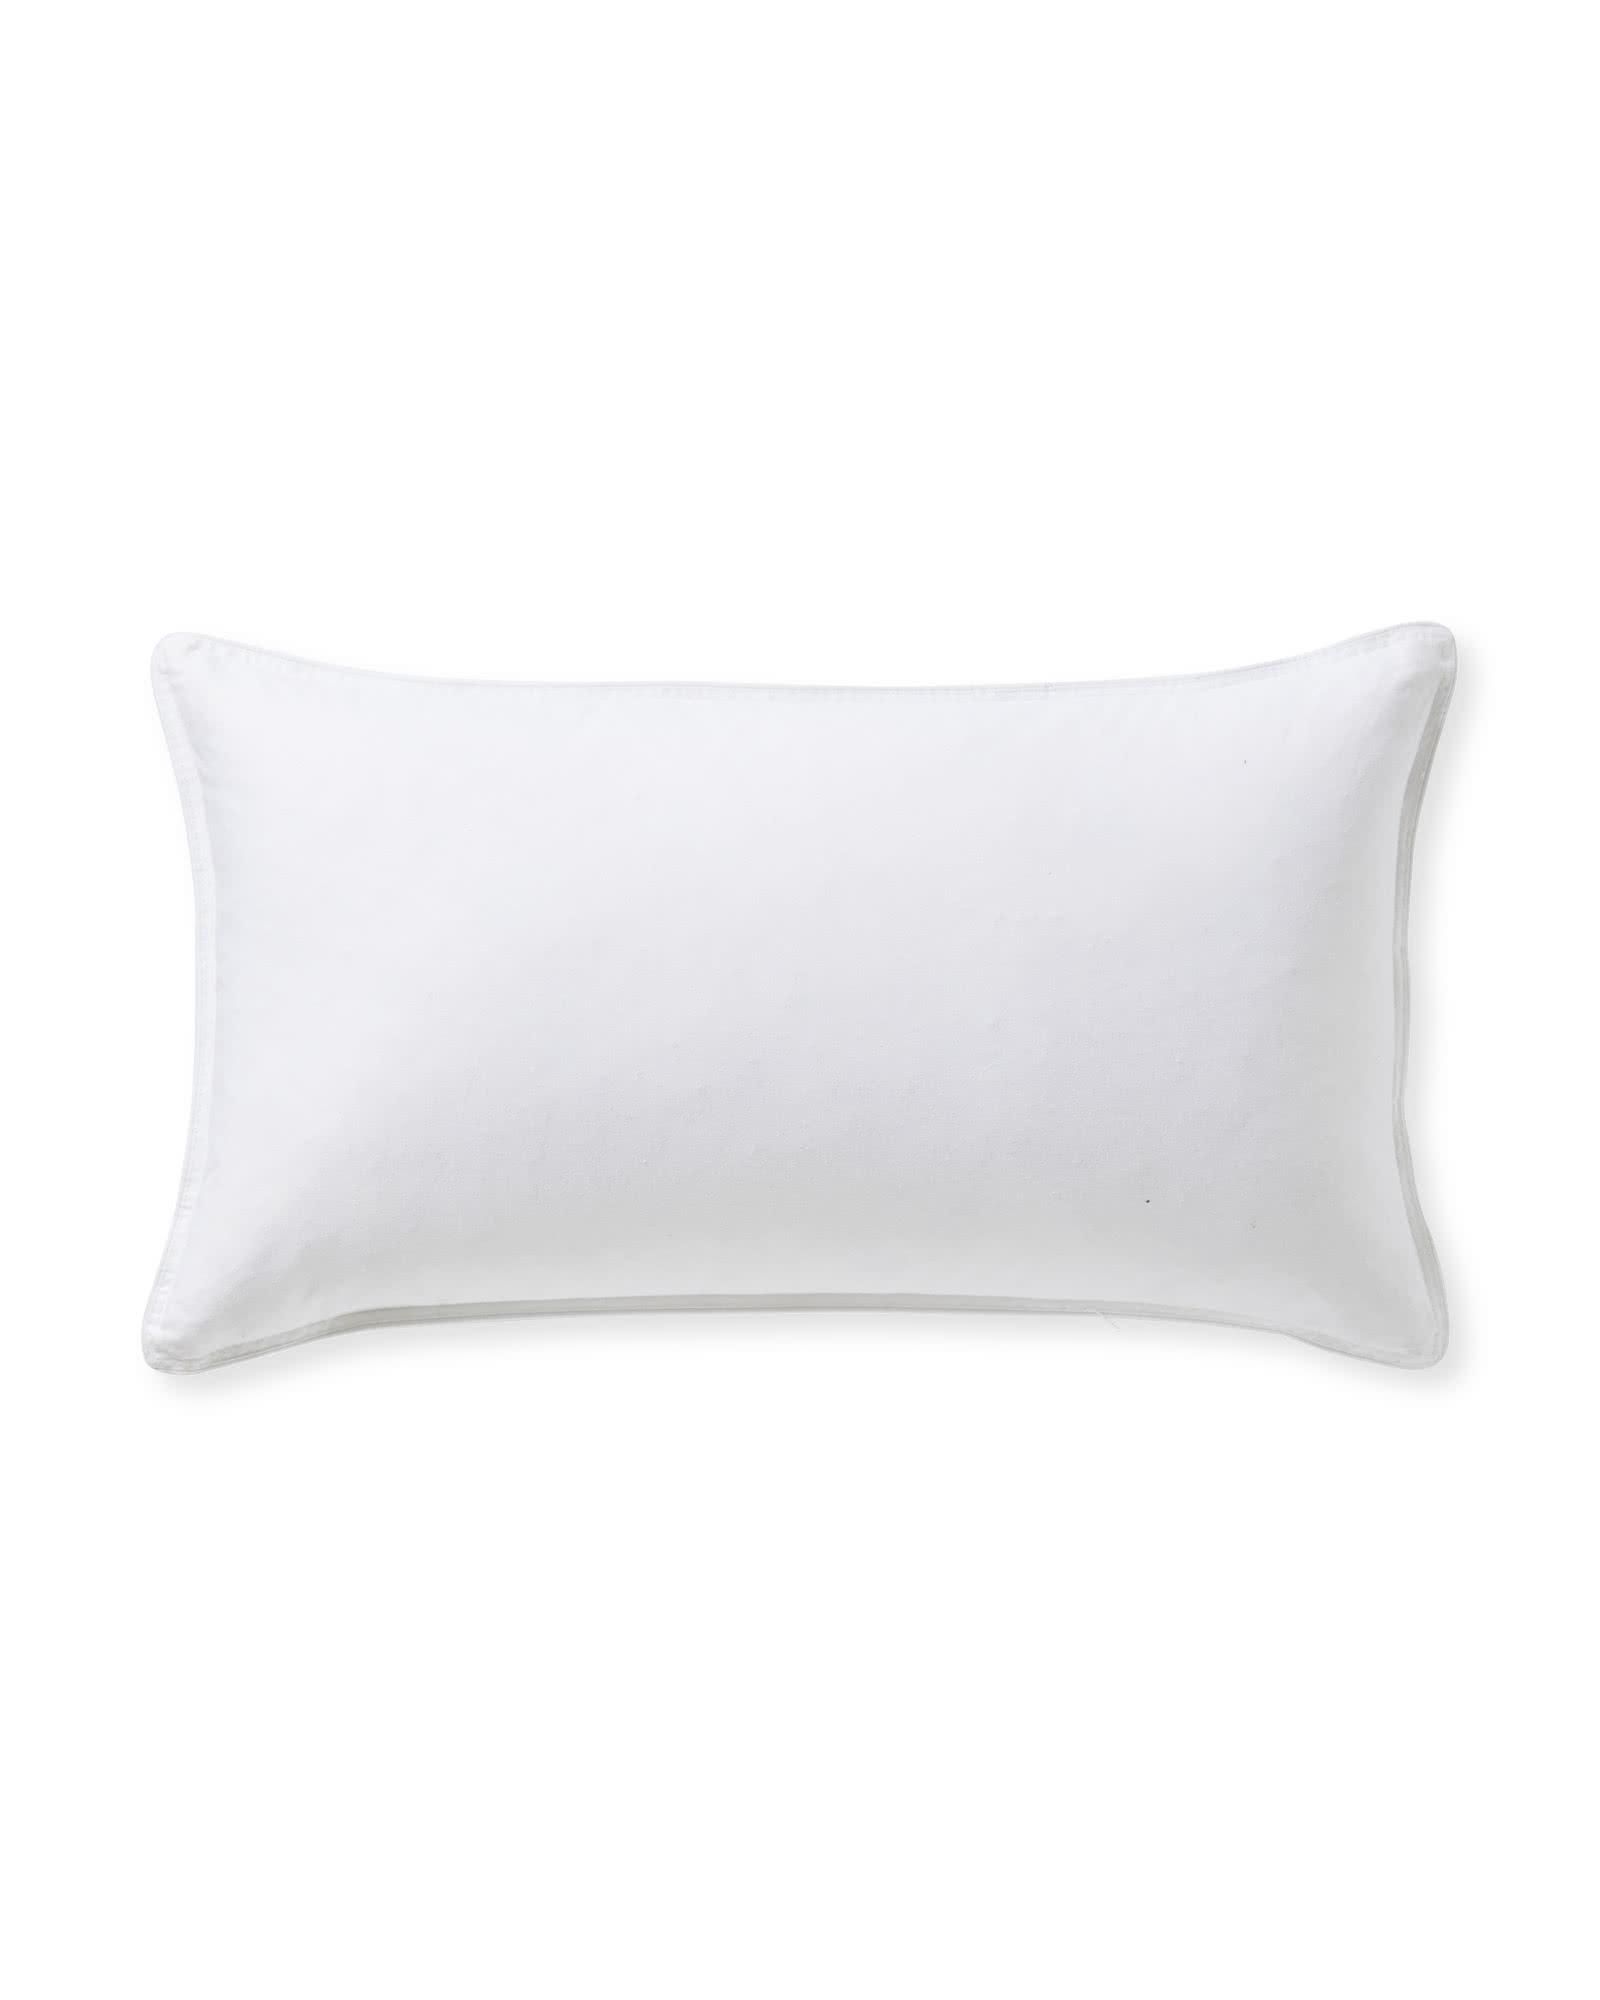 Pillow Inserts | Serena and Lily